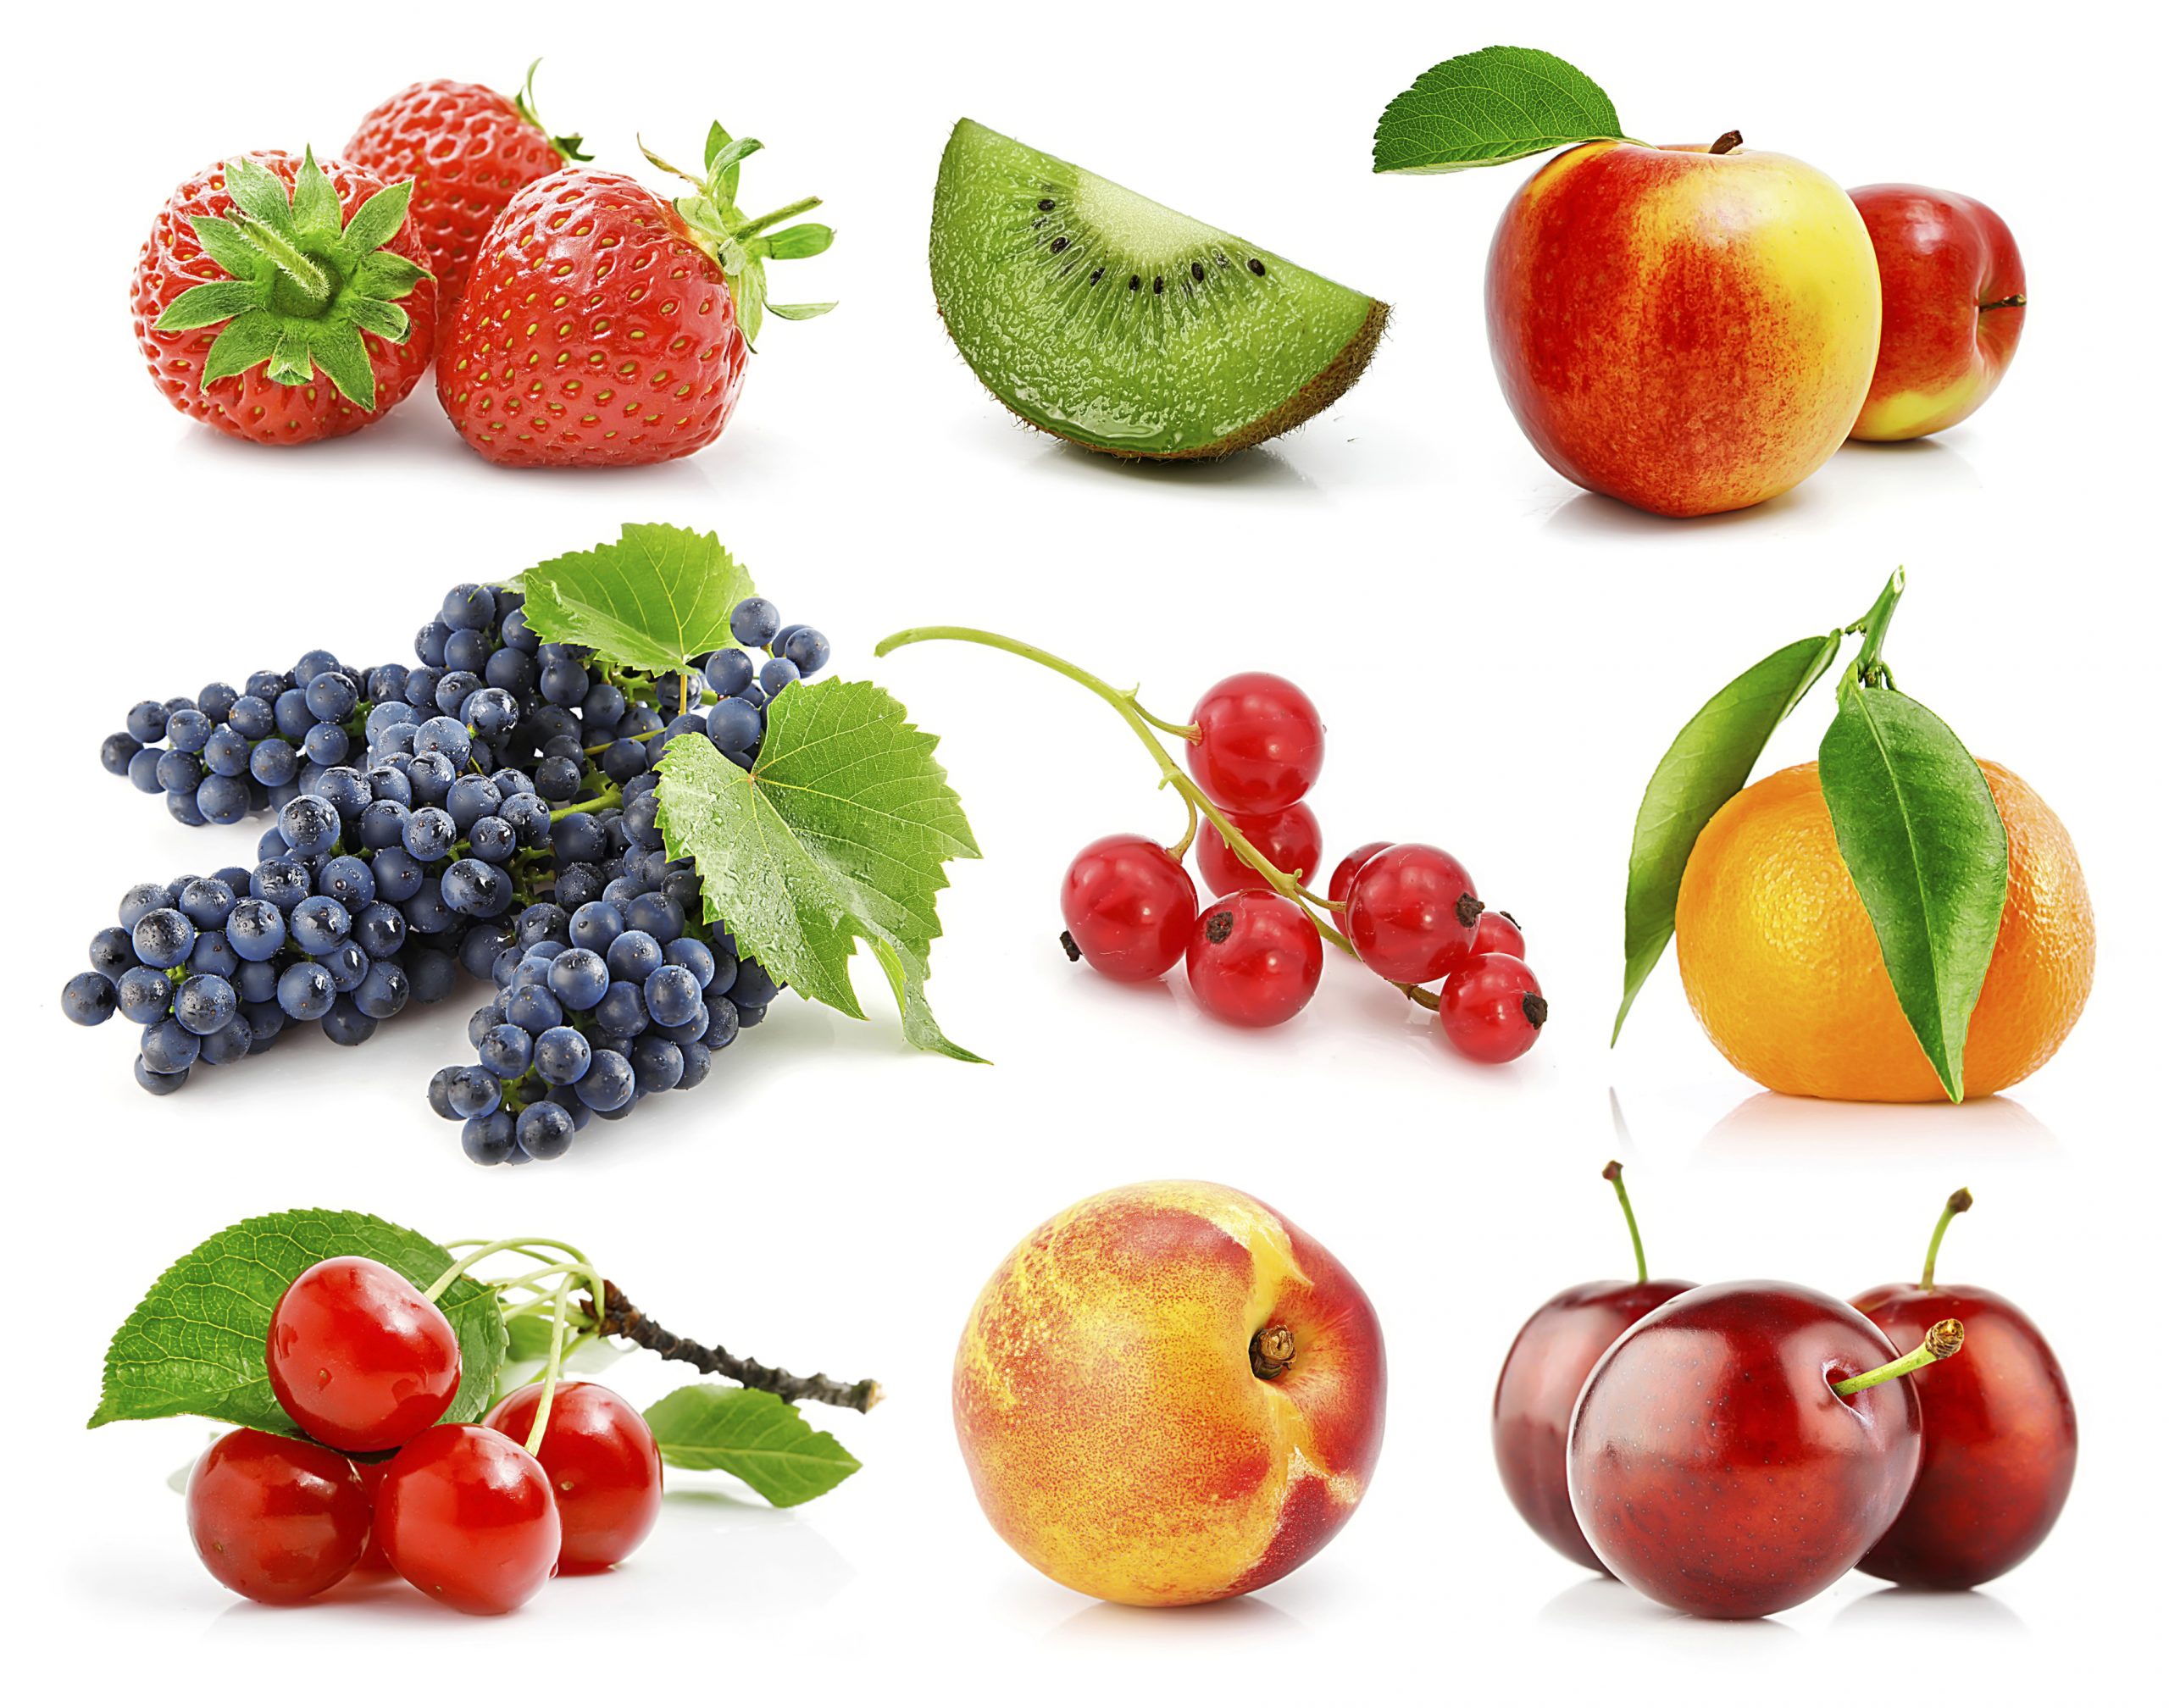 Which fruits are high in sugar, and which are low in sugar?